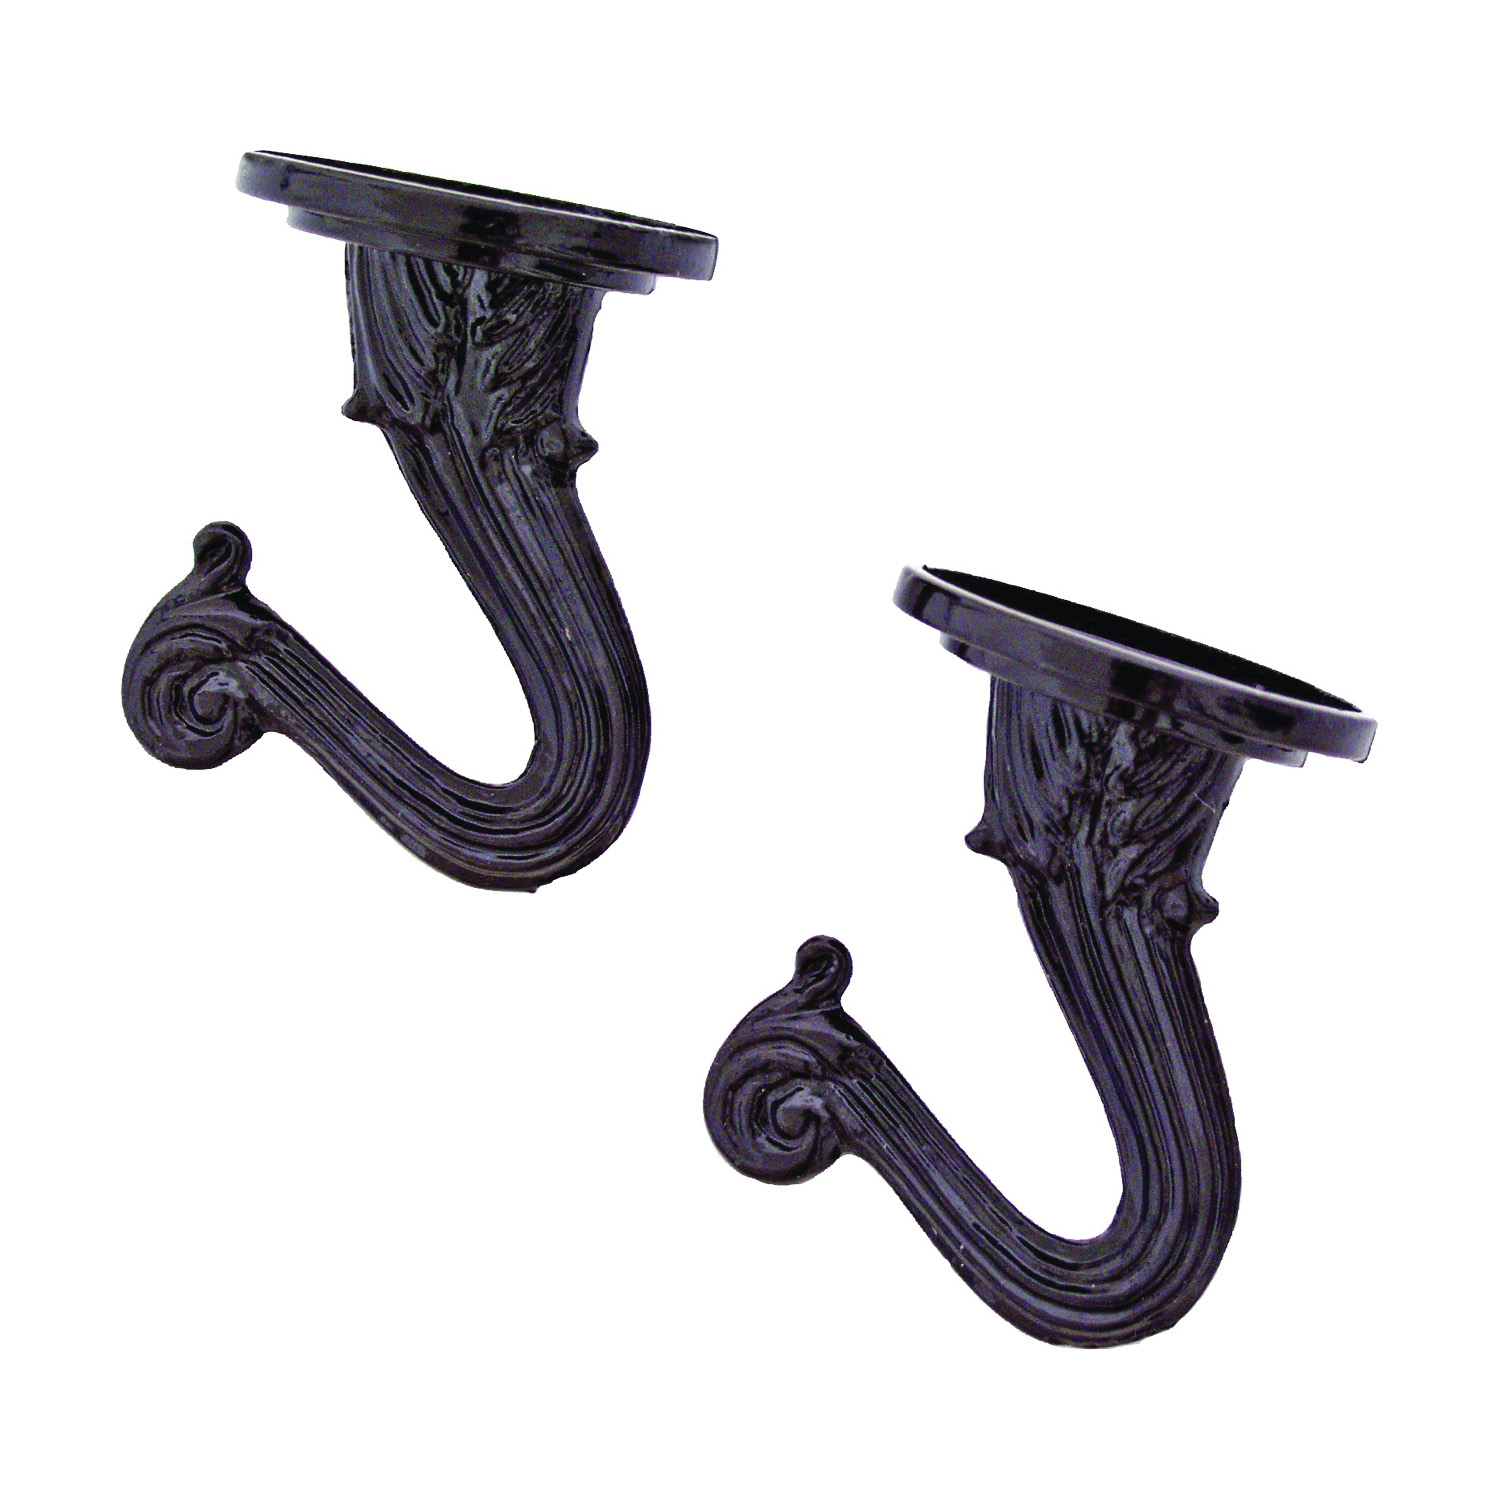 Landscapers Select GB0433L Ceiling Hook, 1.5 in L, 1 Dia in H, Steel, Black Coated Finish, Wall Mount Mounting